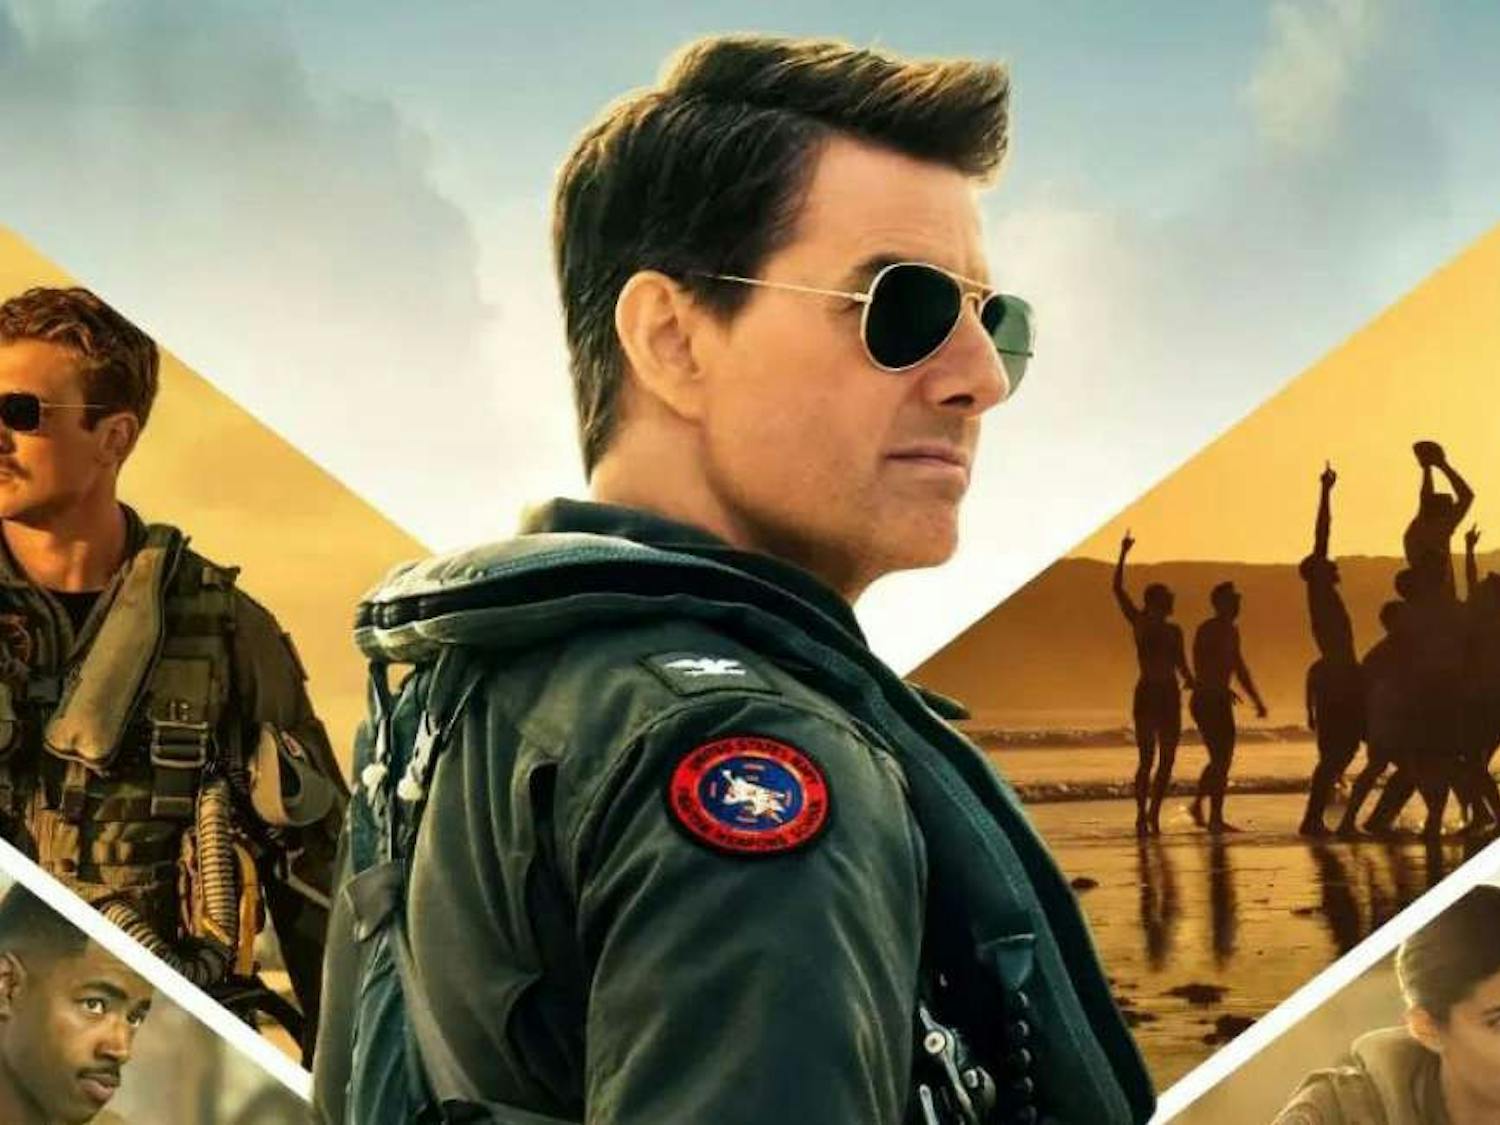 Top Gun: Maverick was released on May 27, 2022